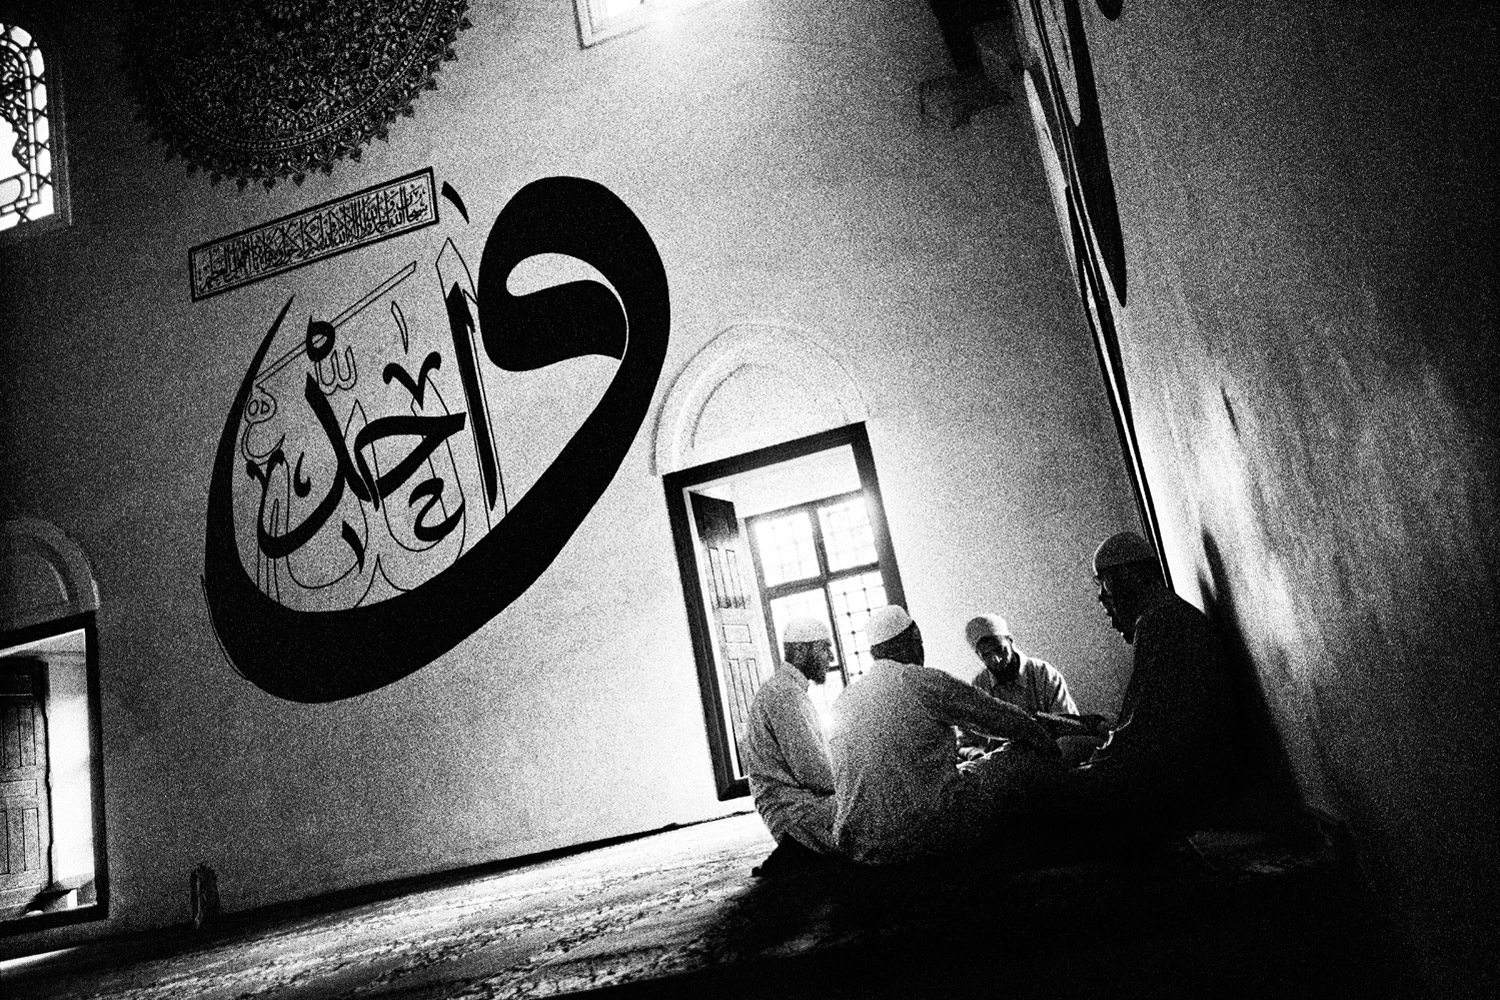 Men gather after prayer at the Old Mosque. Finished in 1414, it is famous for its large-scale wall calligraphy.